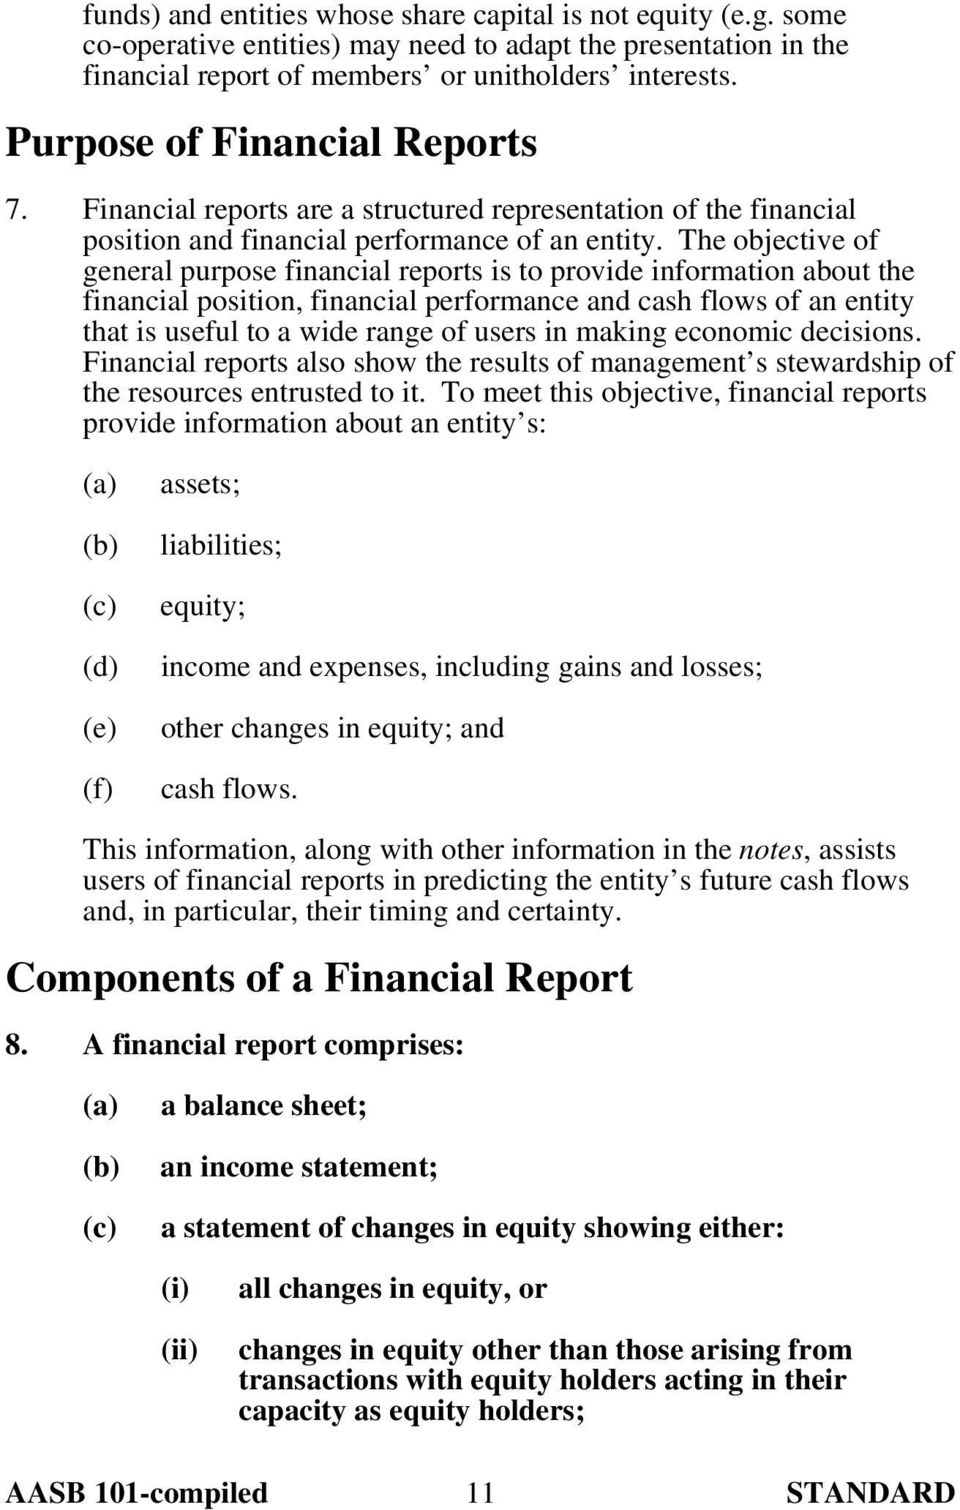 The objective of general purpose financial reports is to provide information about the financial position, financial performance and cash flows of an entity that is useful to a wide range of users in